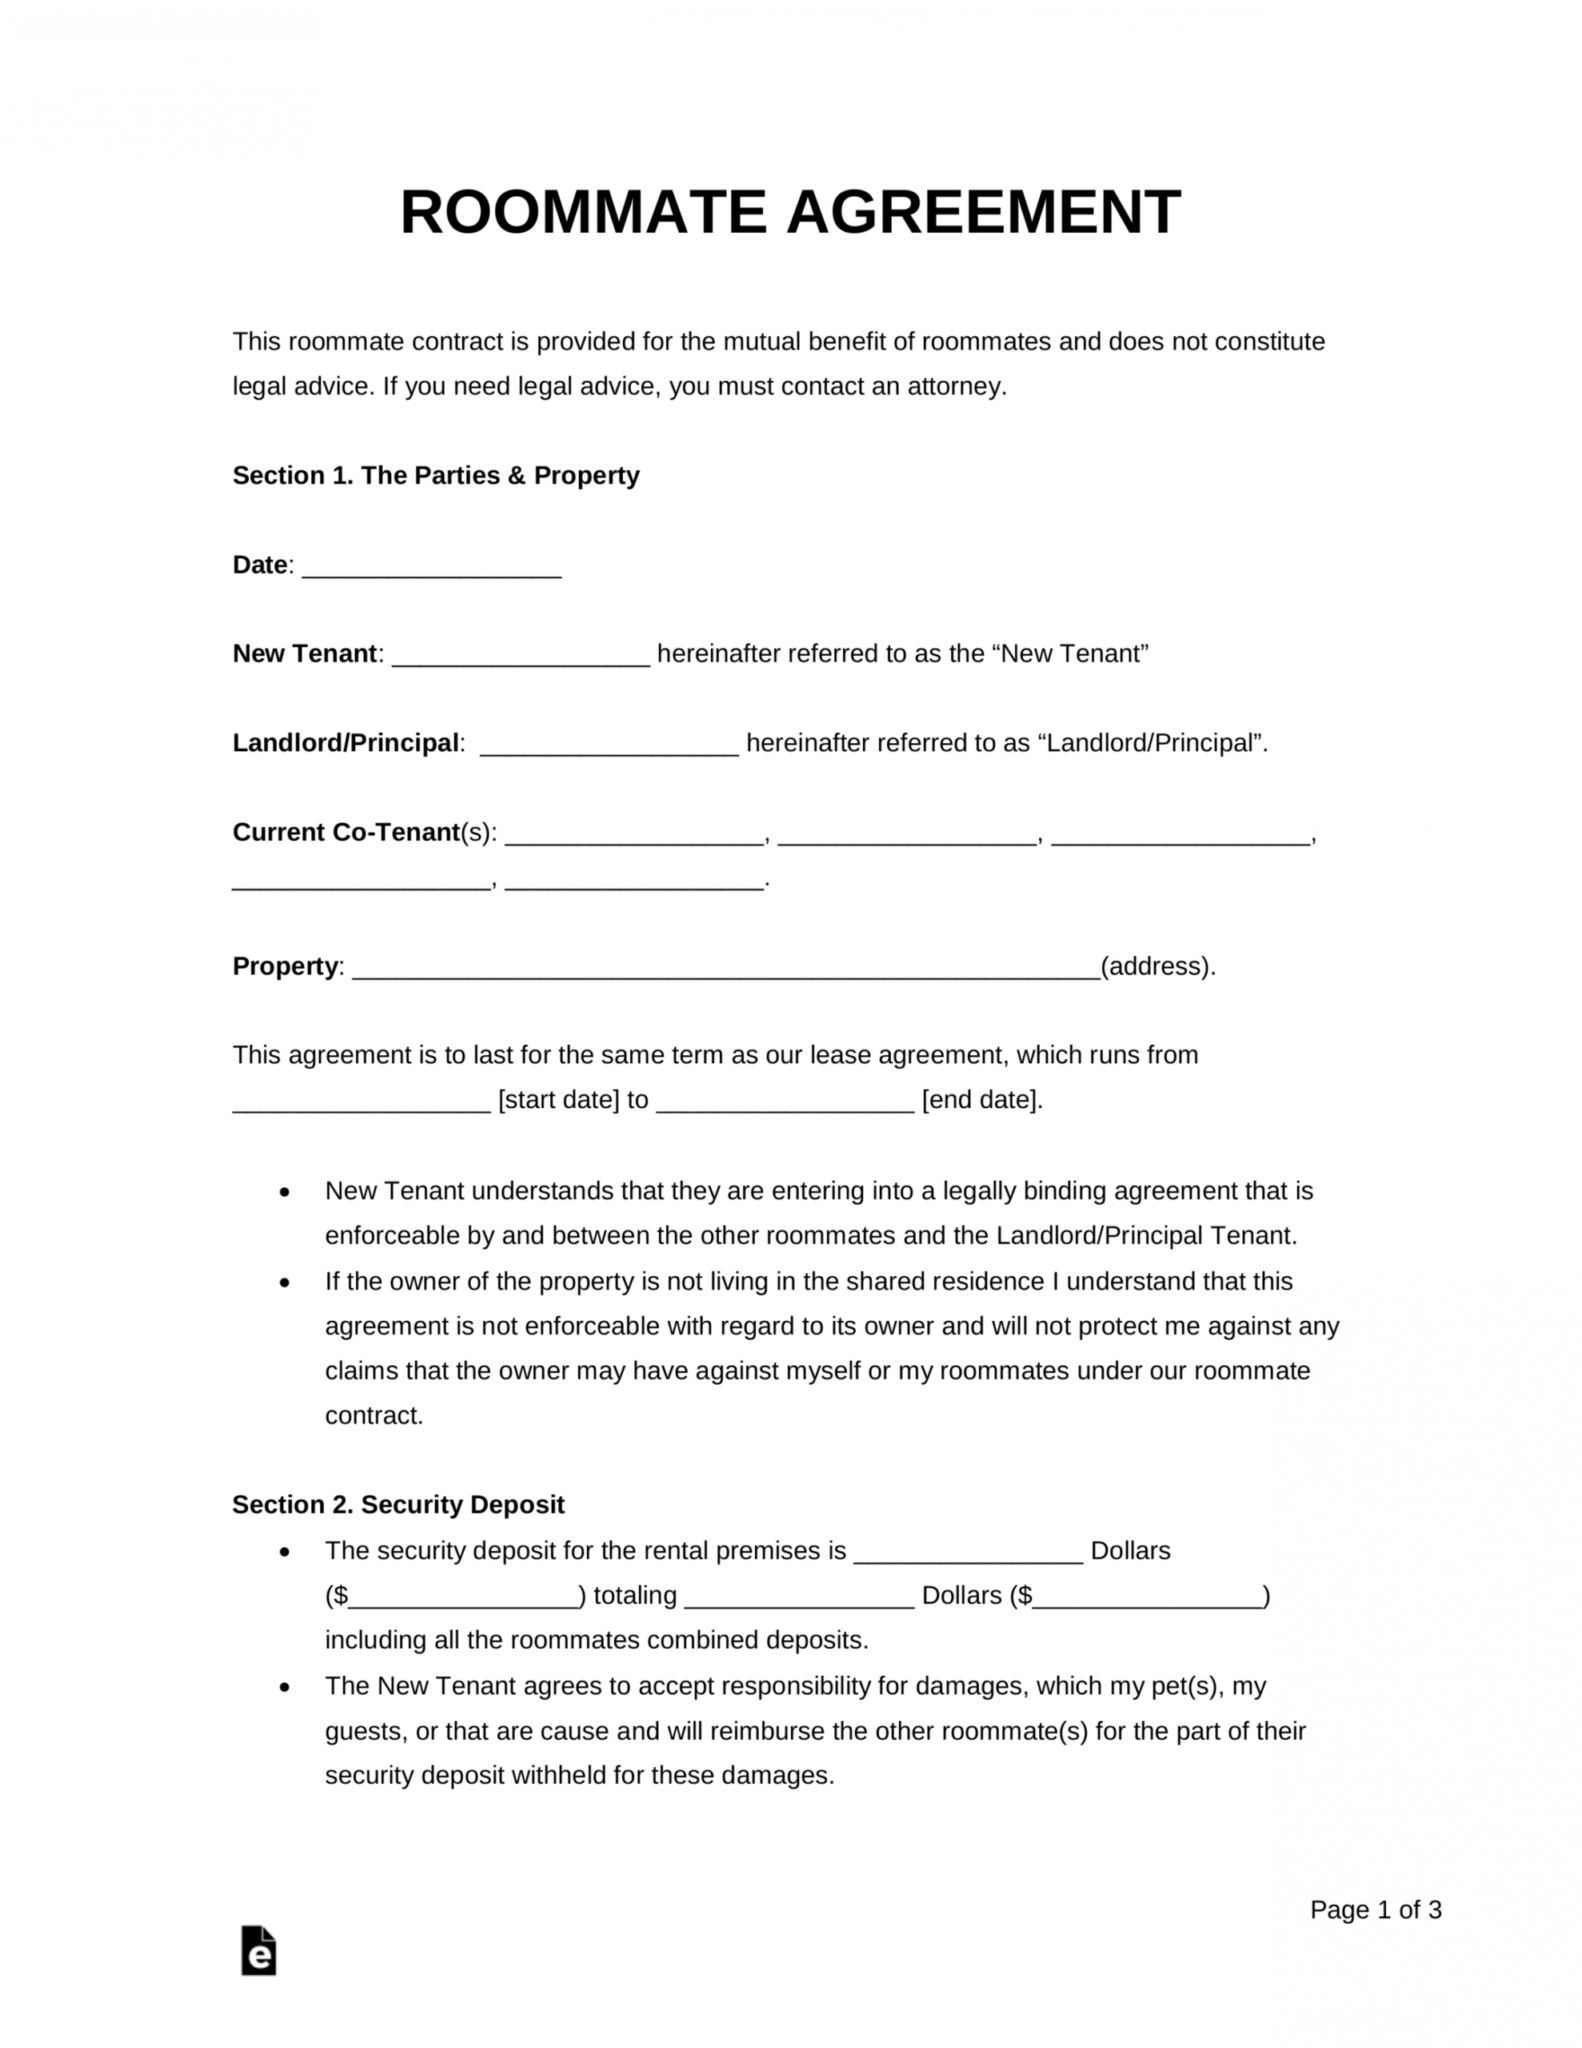 Simple House Rental Agreement Template